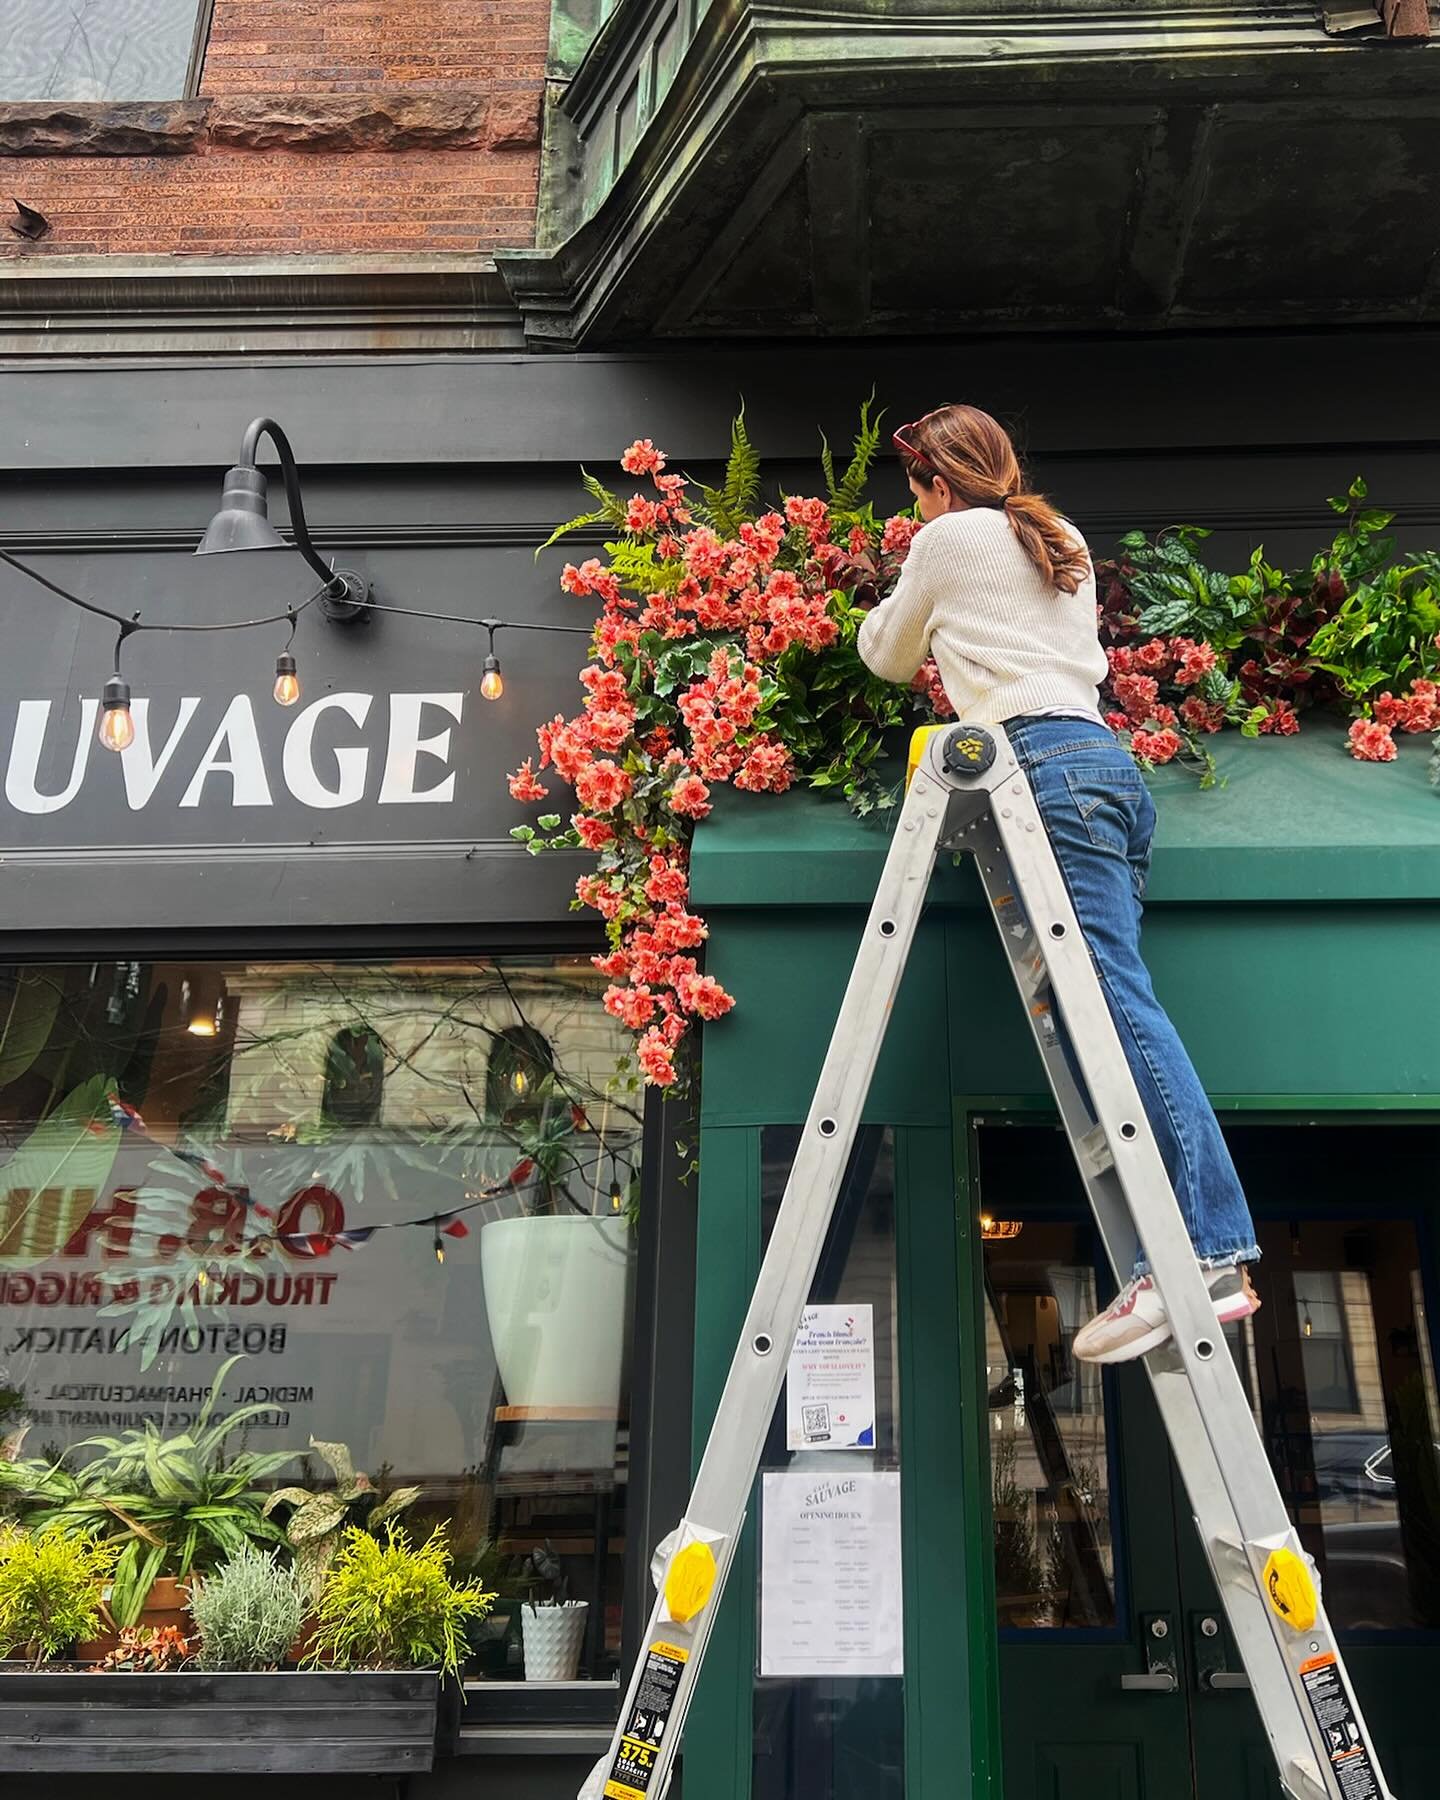 A spring refresh for @cafesauvageboston! Updated installation and new planters! Make sure to stop by and grab a bite or a hot drink and say hello!

#orlykhonfloral #okfdesigns #cafesauvage #bostonfloraldesign #bostonplantings #bostoncafe #springplant